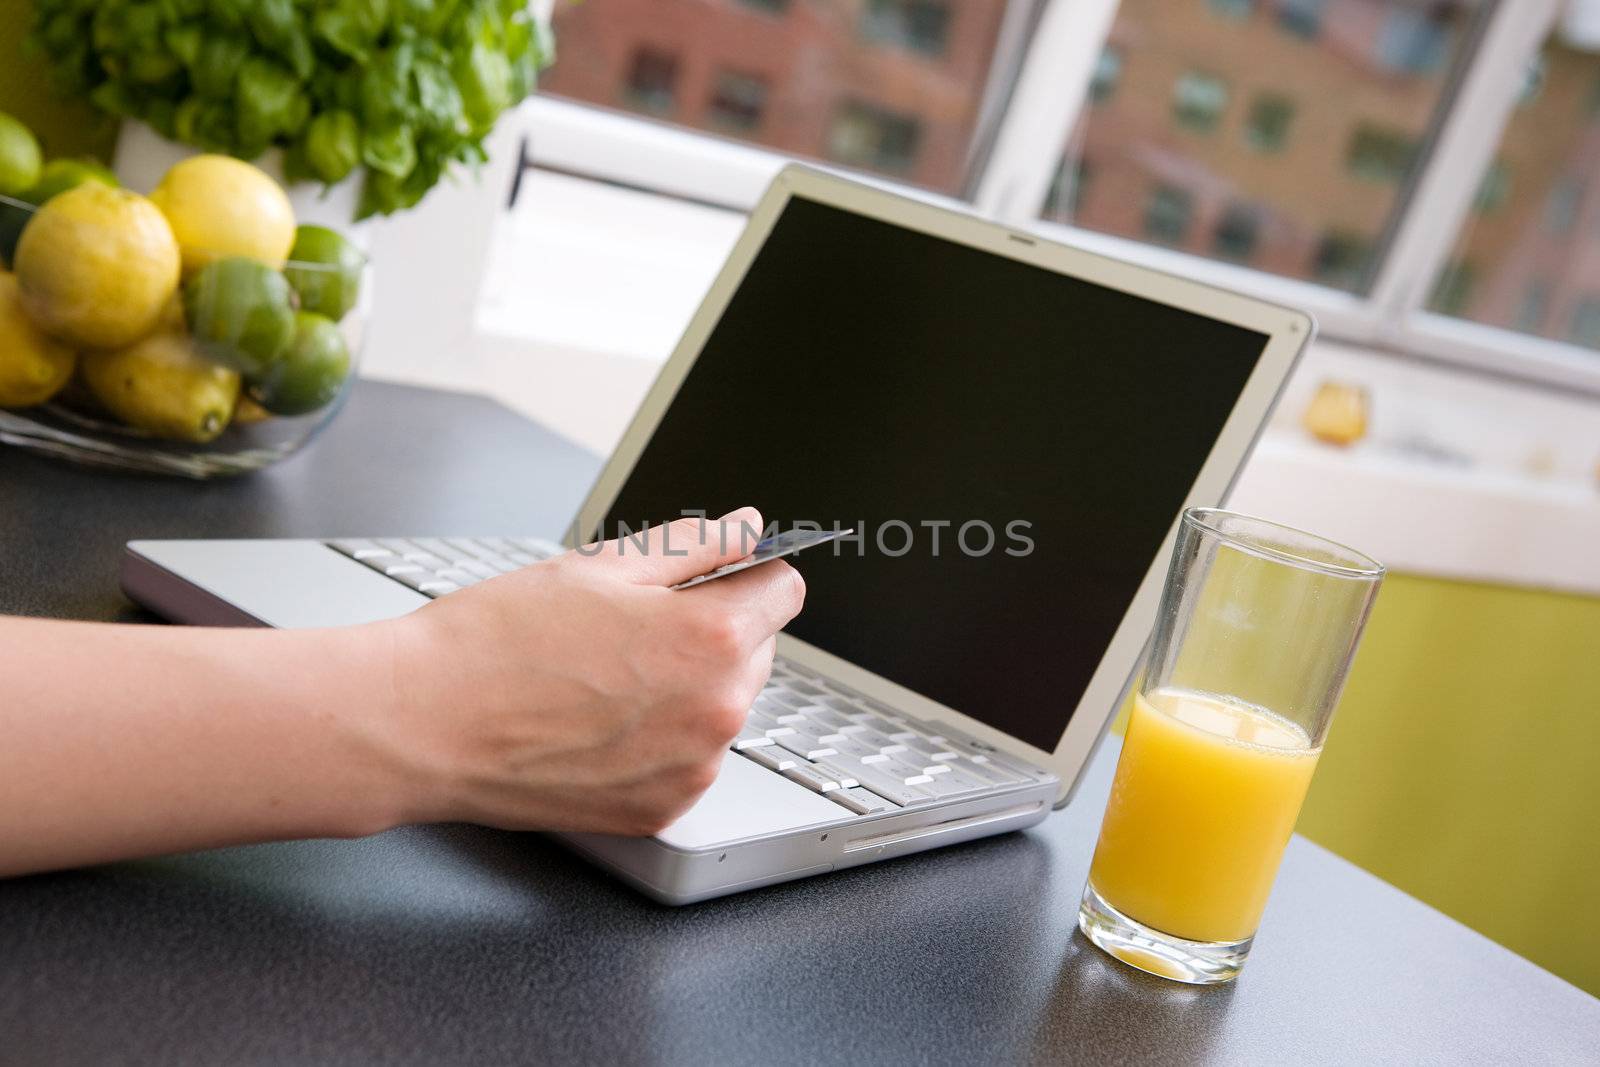 A young female making an online purchase from her kitchen.